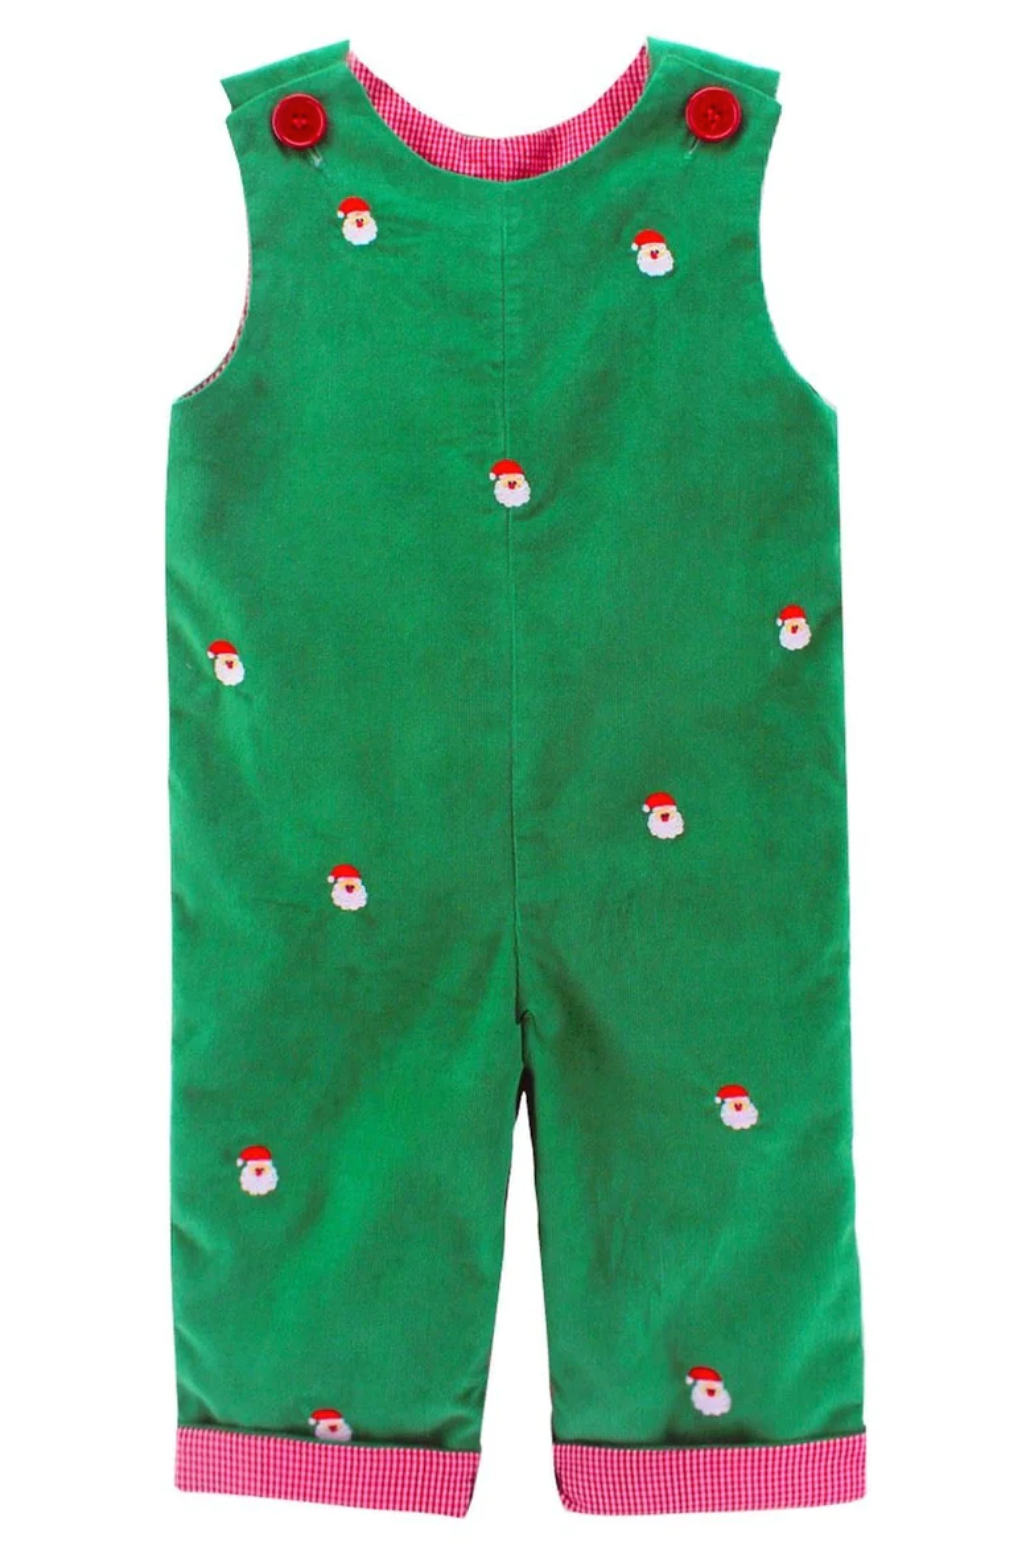 Buy Mobison Santa Claus Dress Costume for Baby Boys Girls Kids (0-6 Months)  For Christmas/New Year (Premium Series) Online at Low Prices in India -  Amazon.in